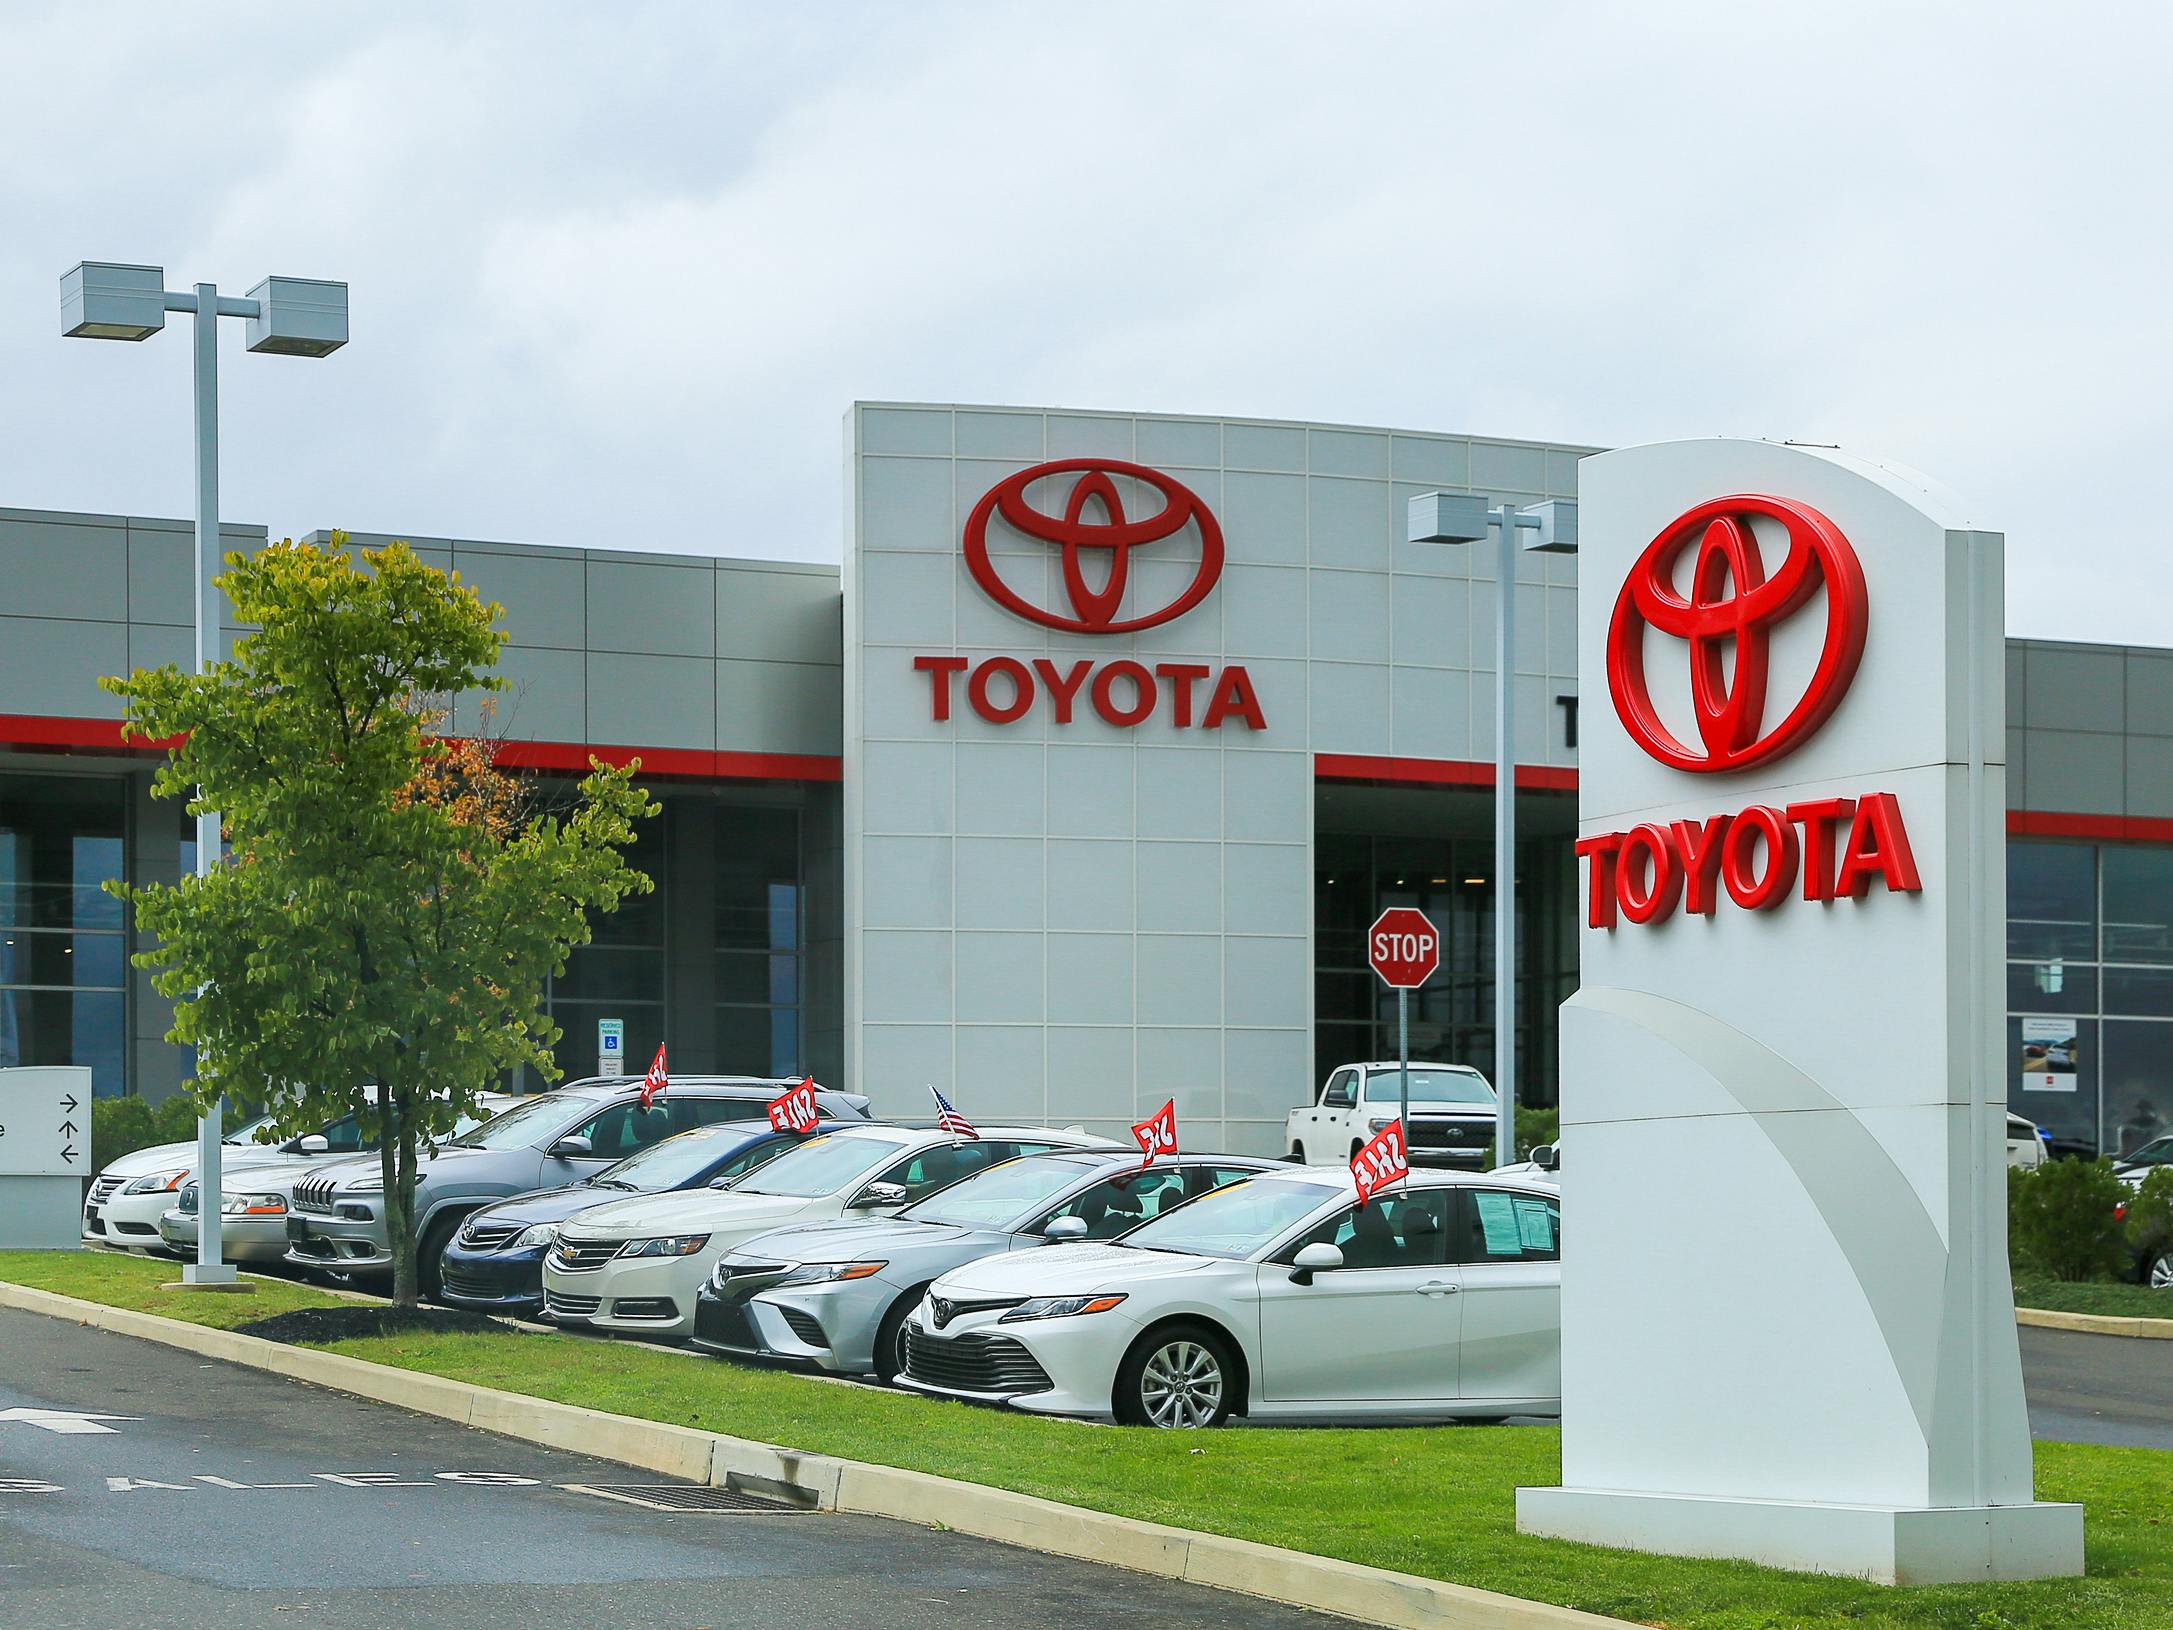 The front lot of a Toyota dealership with signs